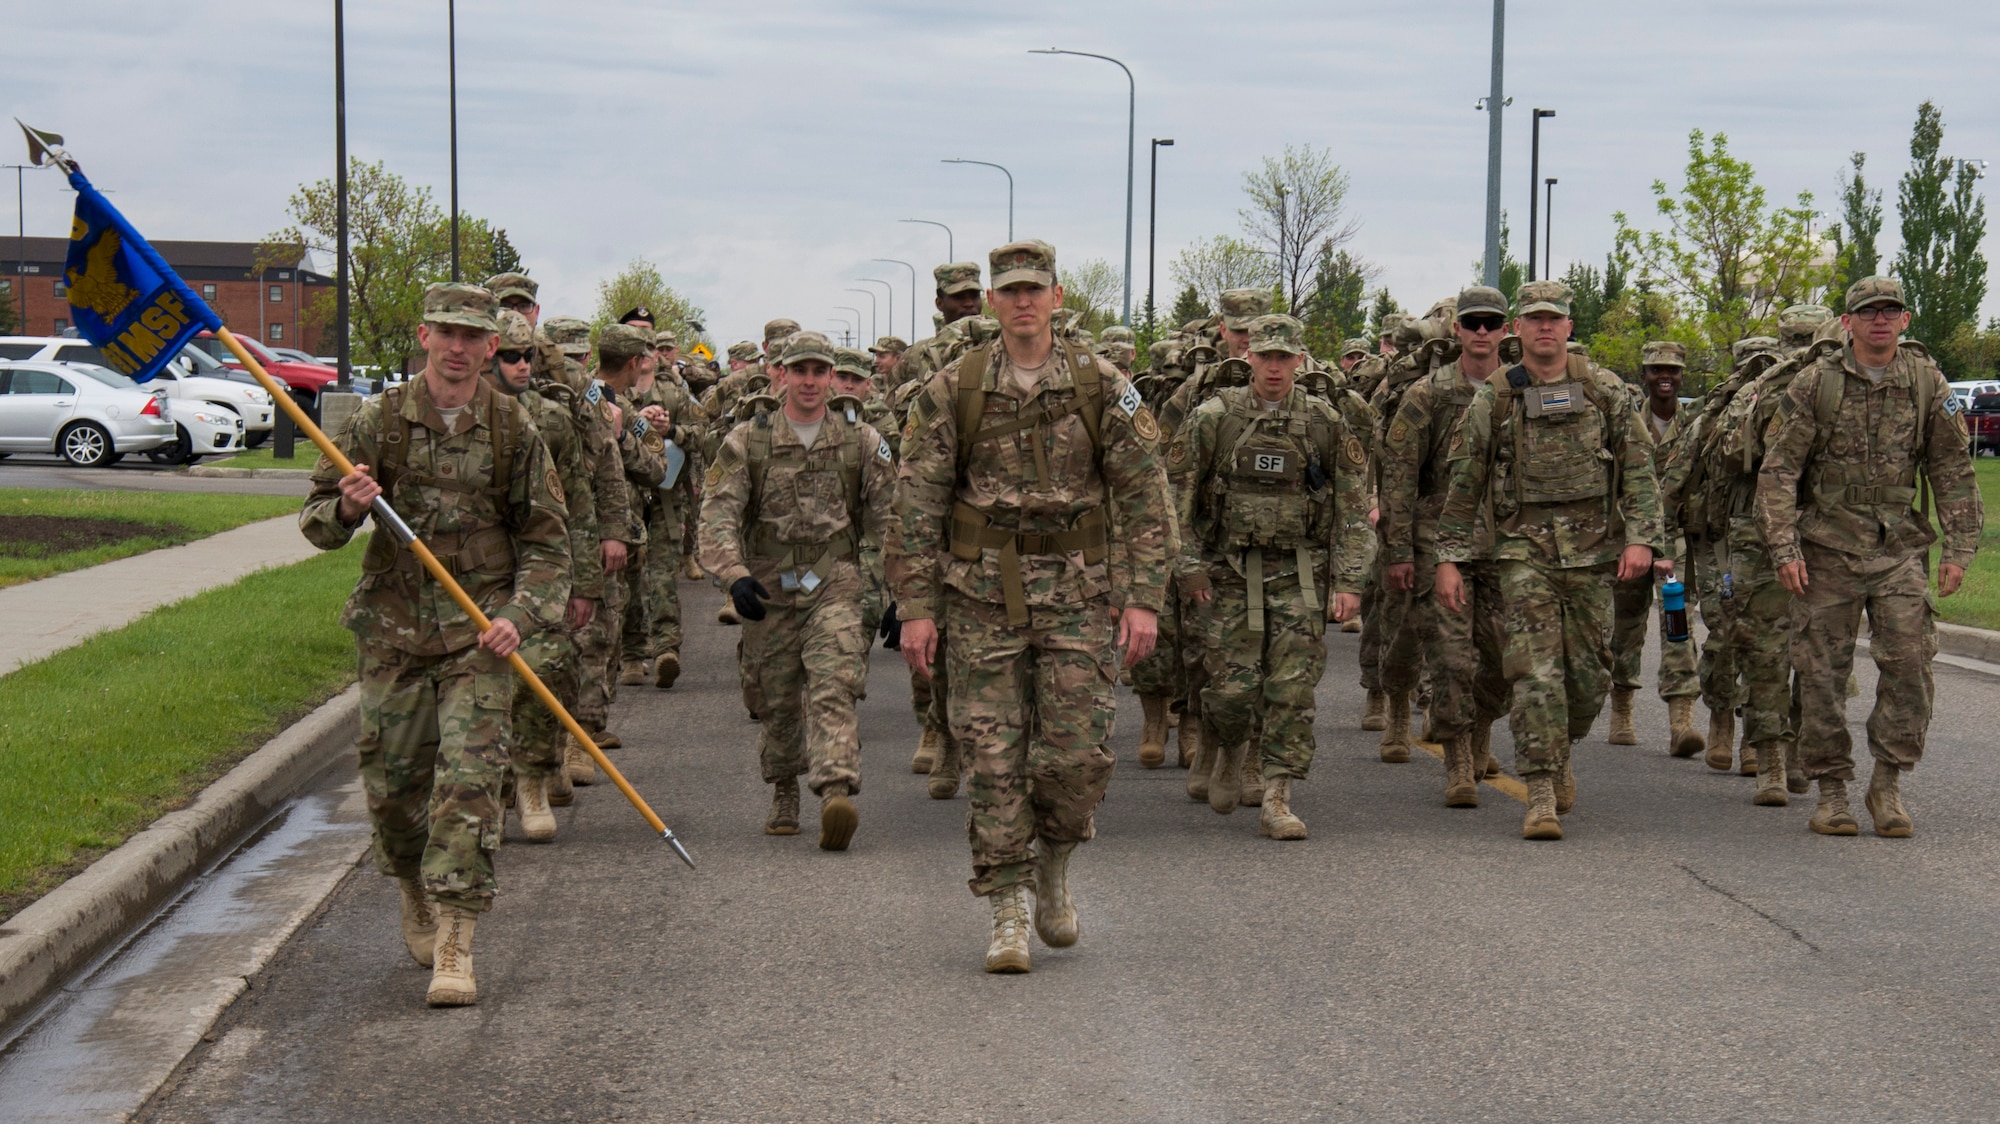 Airmen with the 91st Security Forces Group begin a 5K Remembrance Ruck March in honor of National Police Week at Minot Air Force Base, N.D., May 16, 2017. Base personnel and local law enforcement were invited to participate in the march to honor fallen law enforcement personnel. (U.S. Air Force photo/Airman 1st Class Alyssa M. Akers)